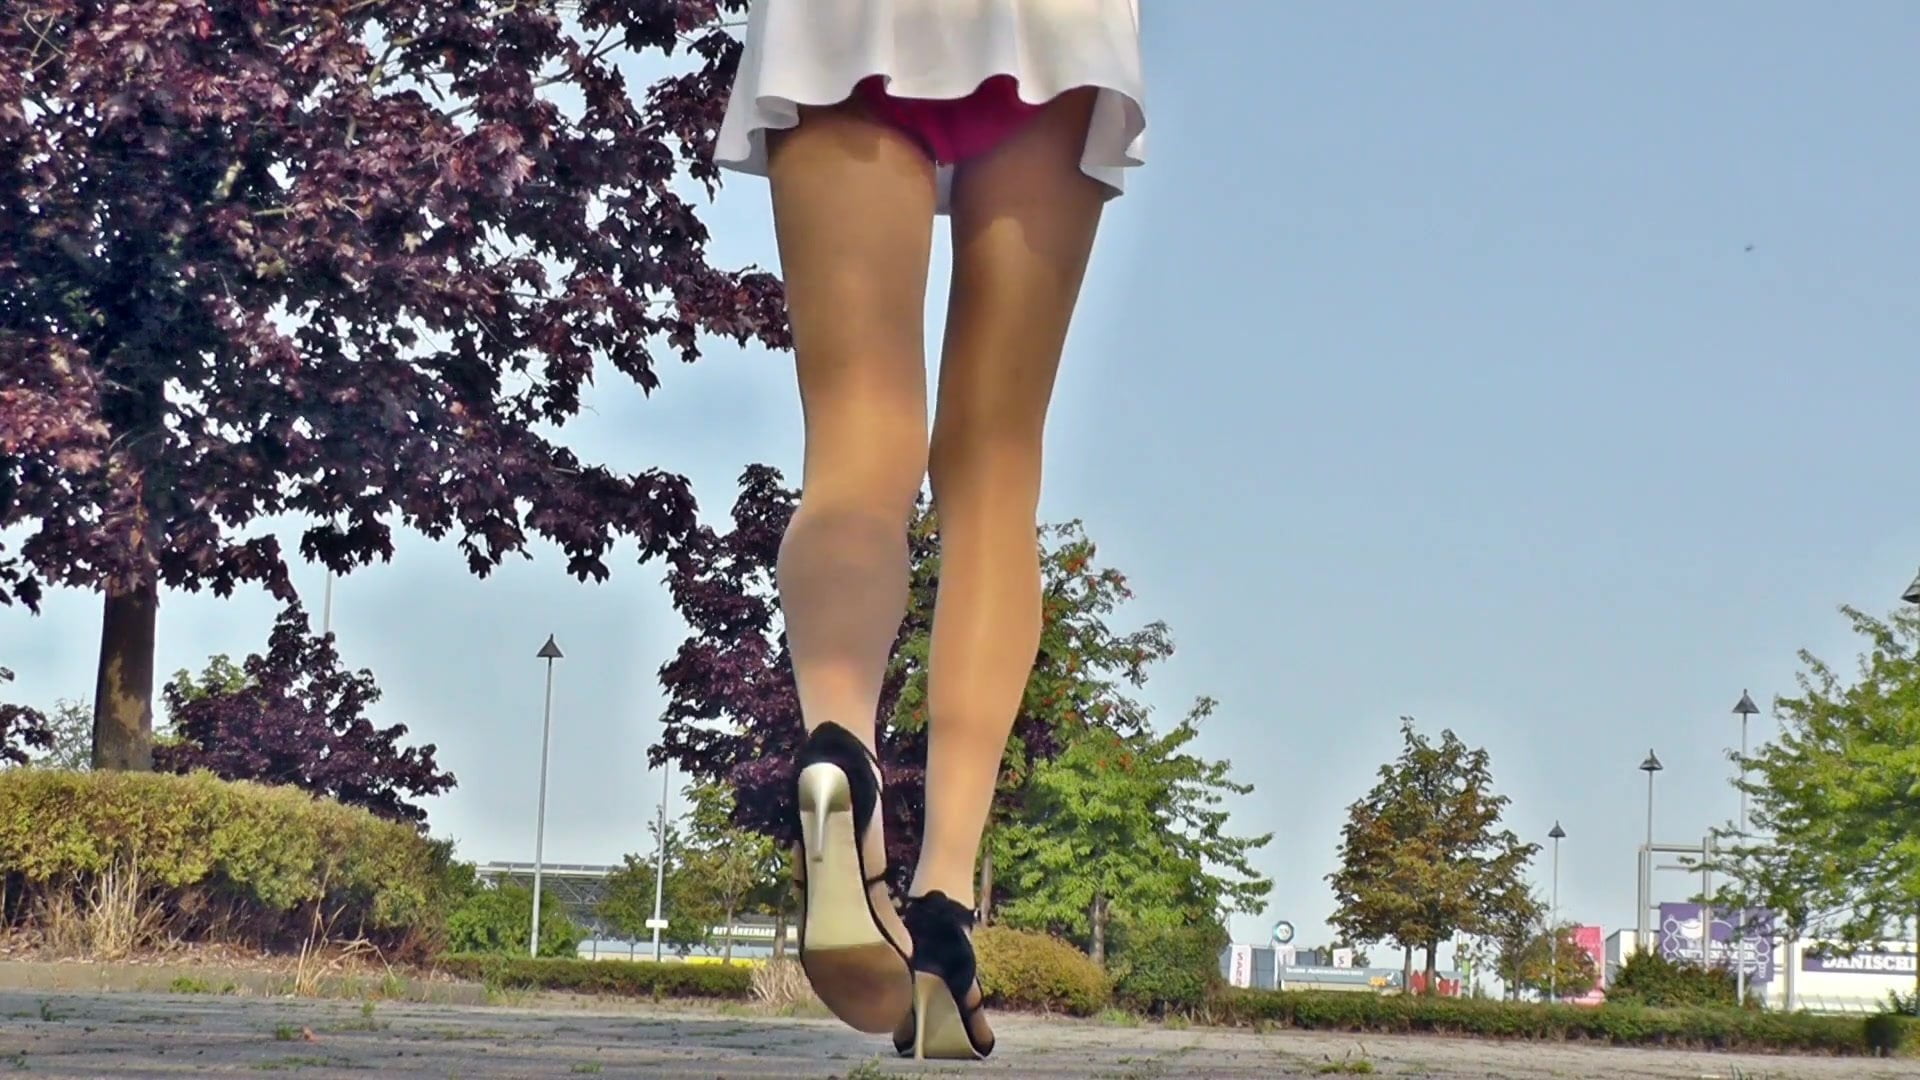 public skirts in Very short